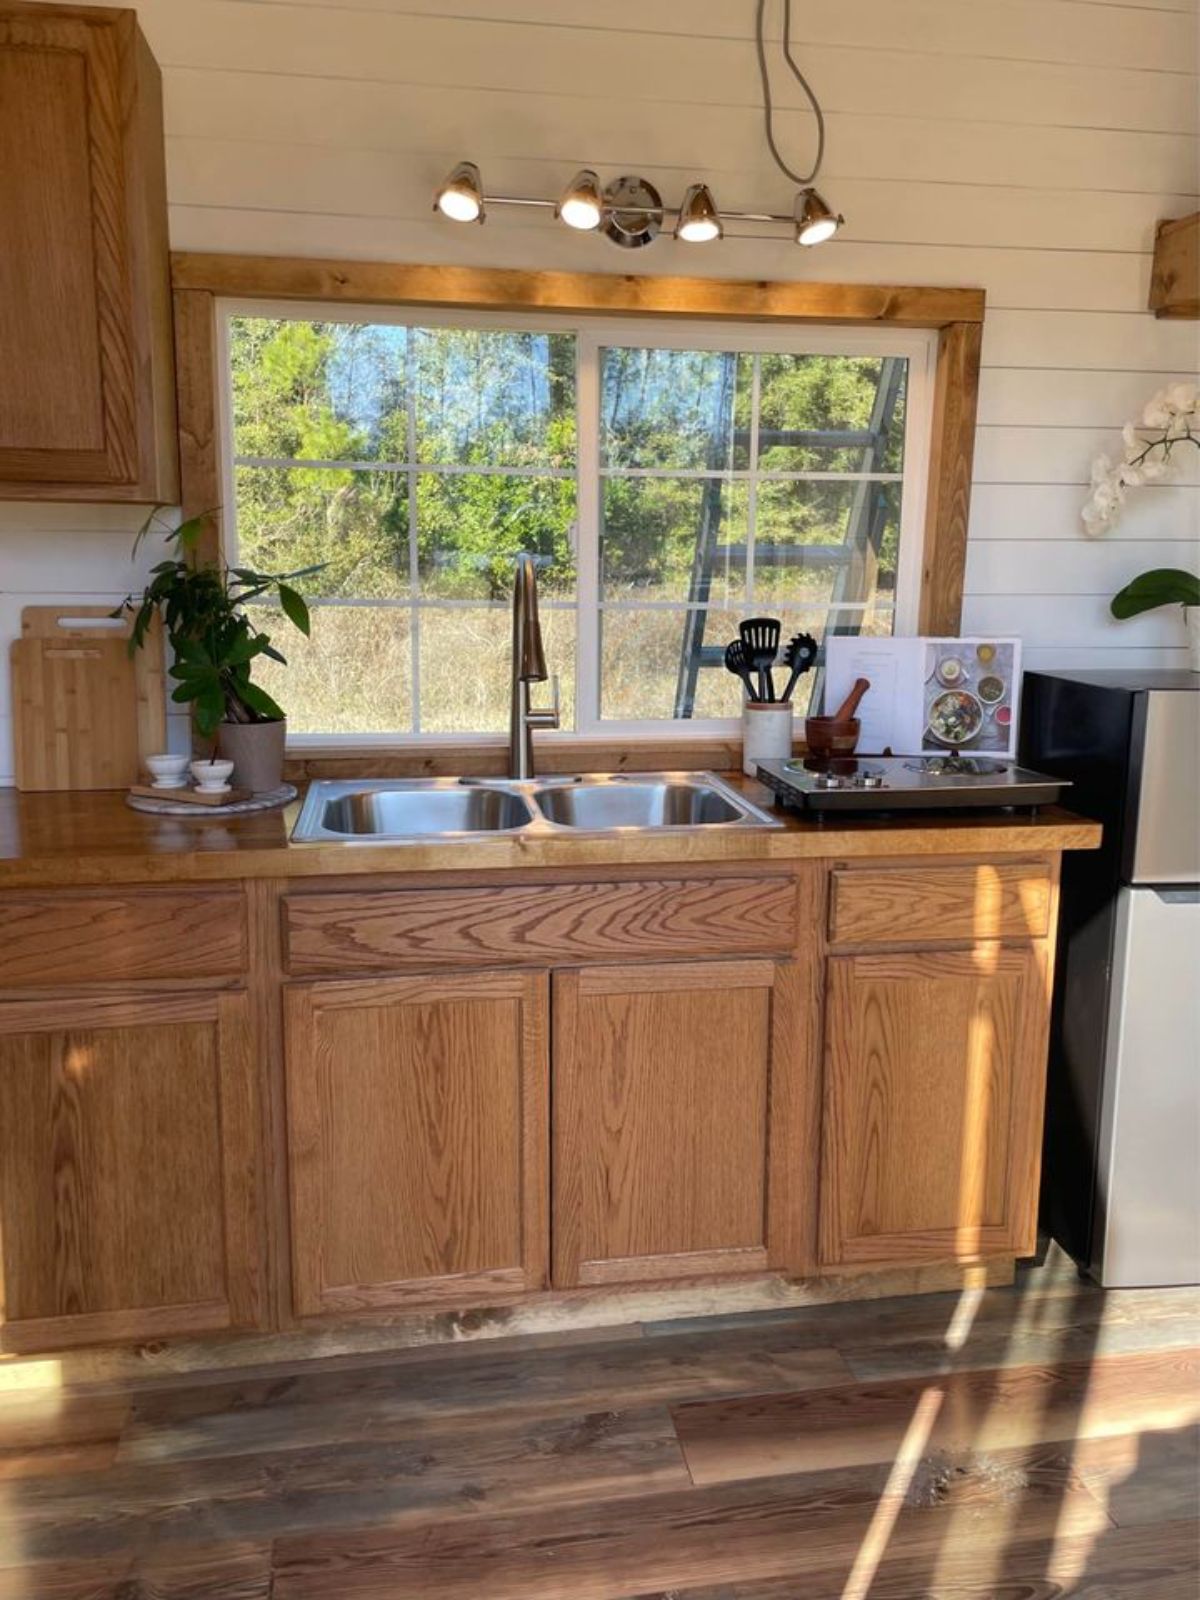 wooden interiors of a kitchen in a tiny home